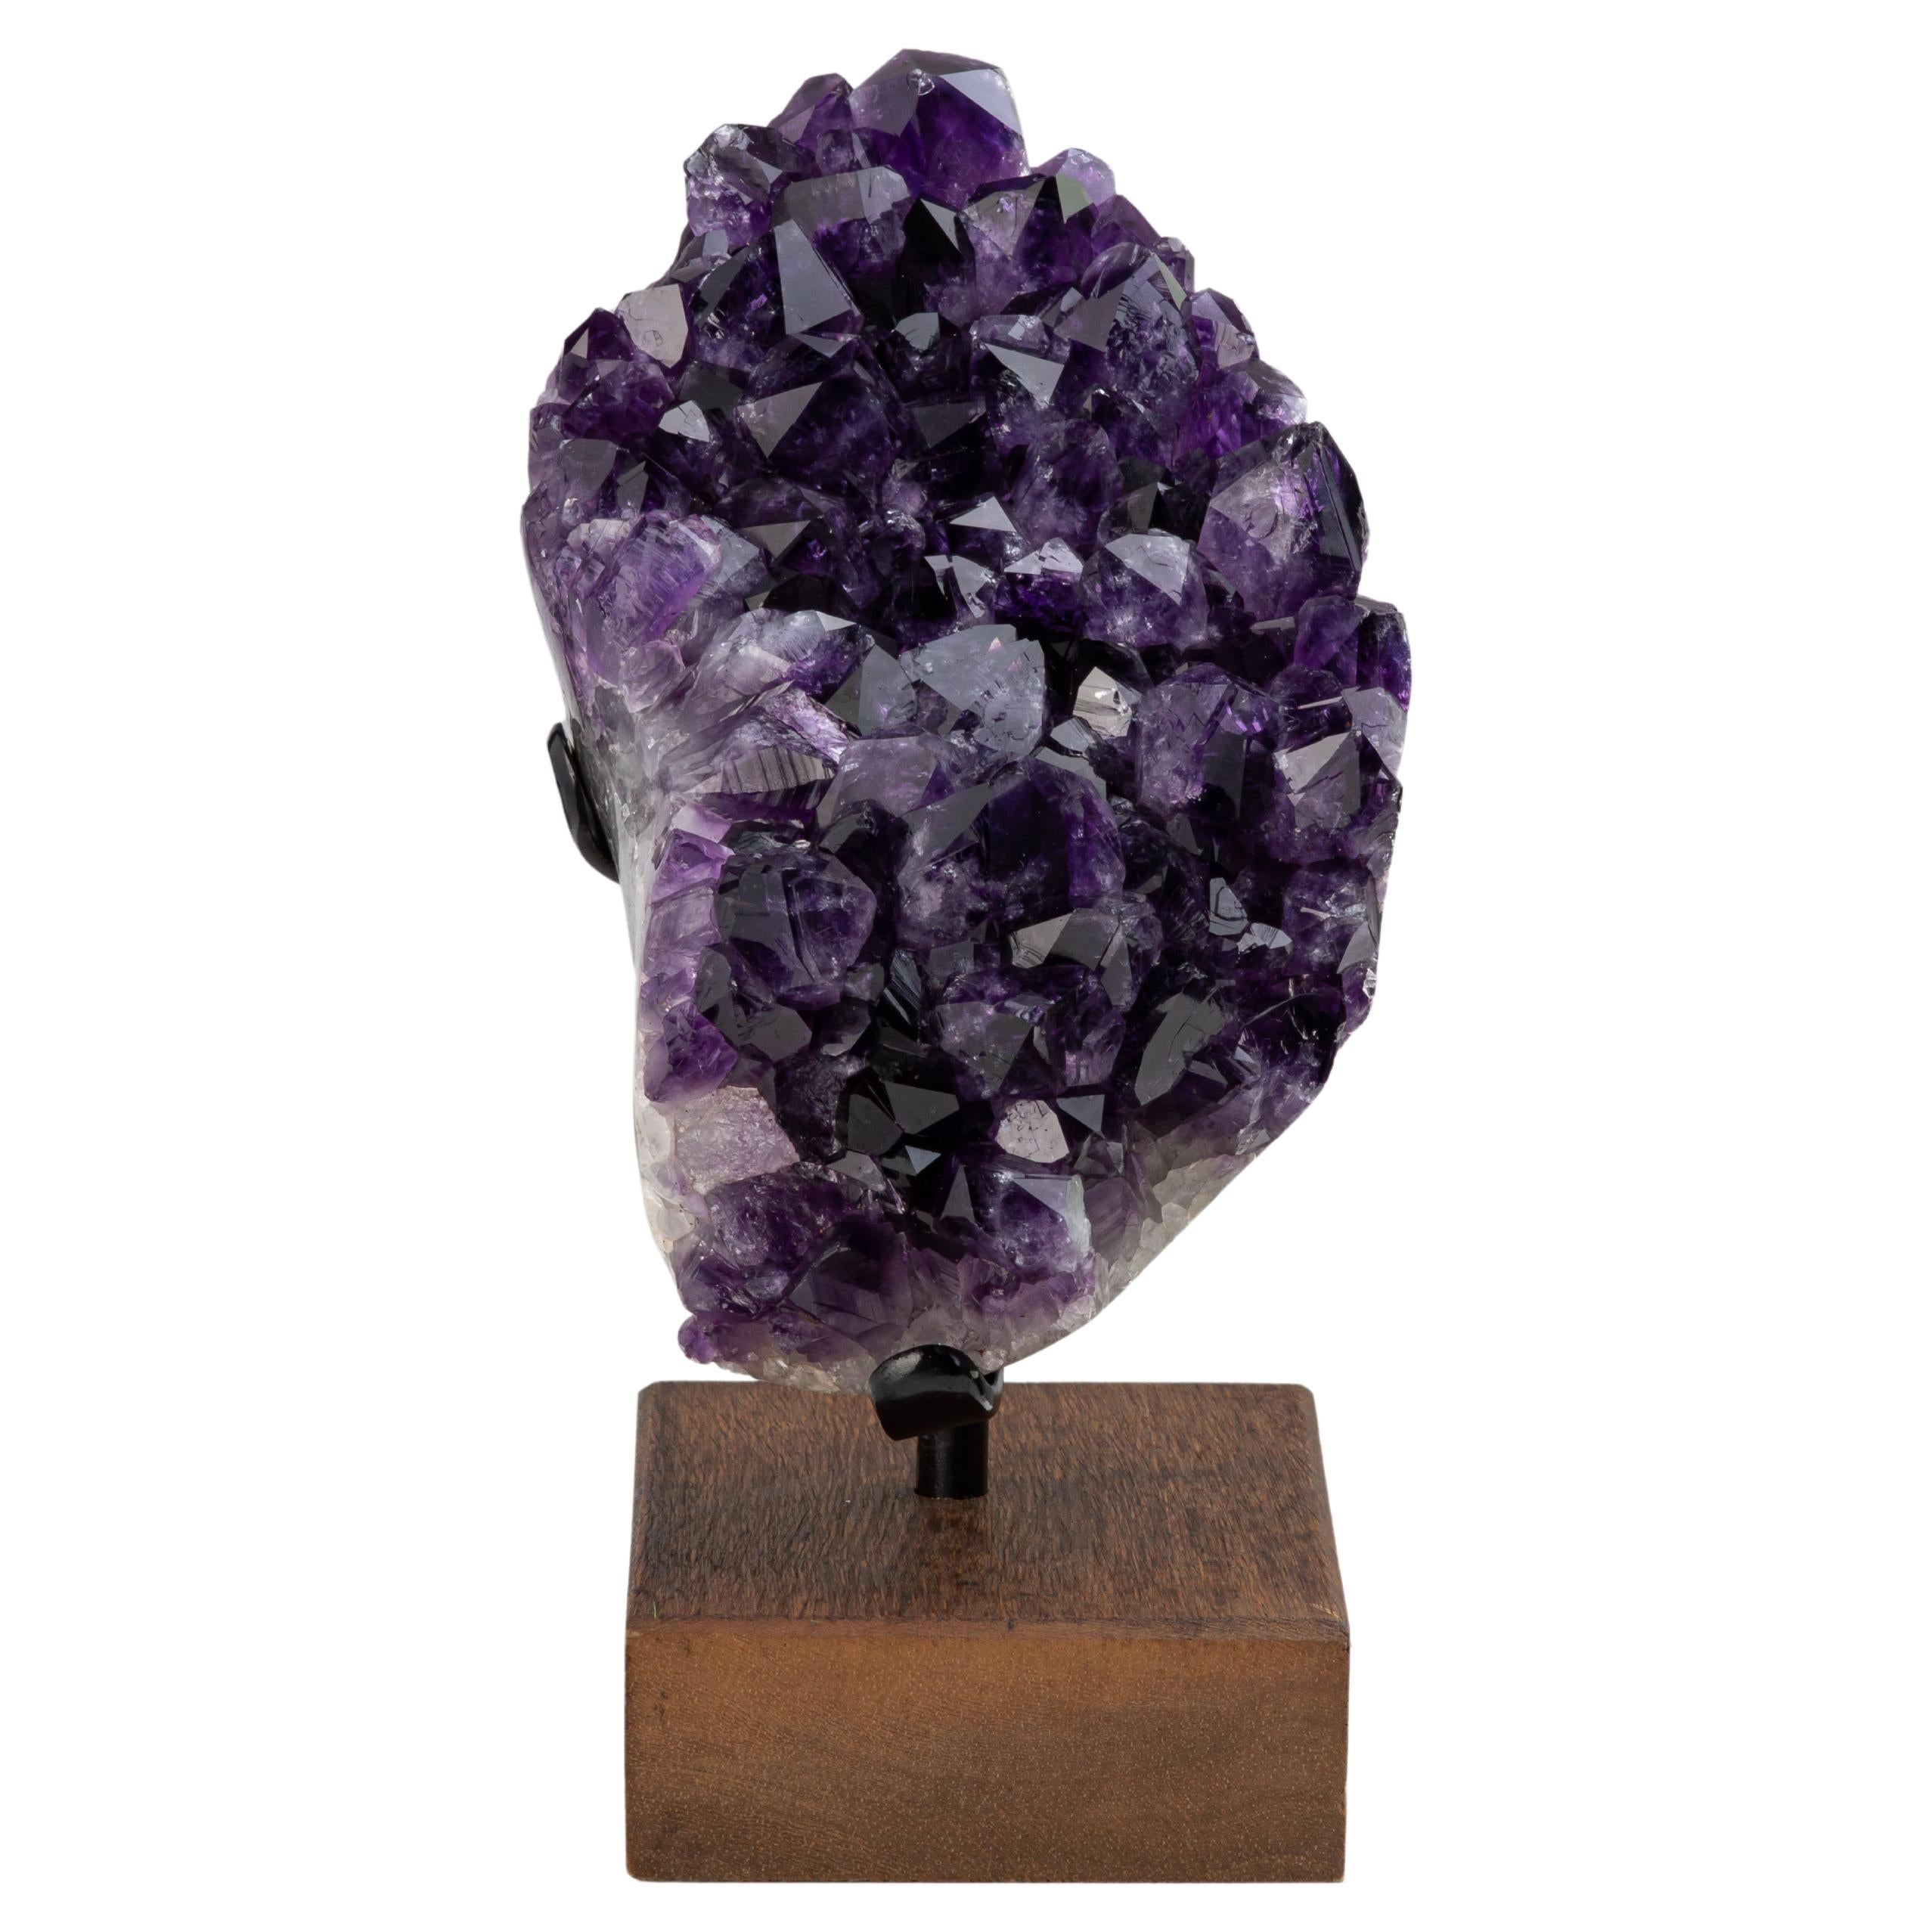 Amethyst Mineral Specimen with High Crystal Peaks on Wooden Stand